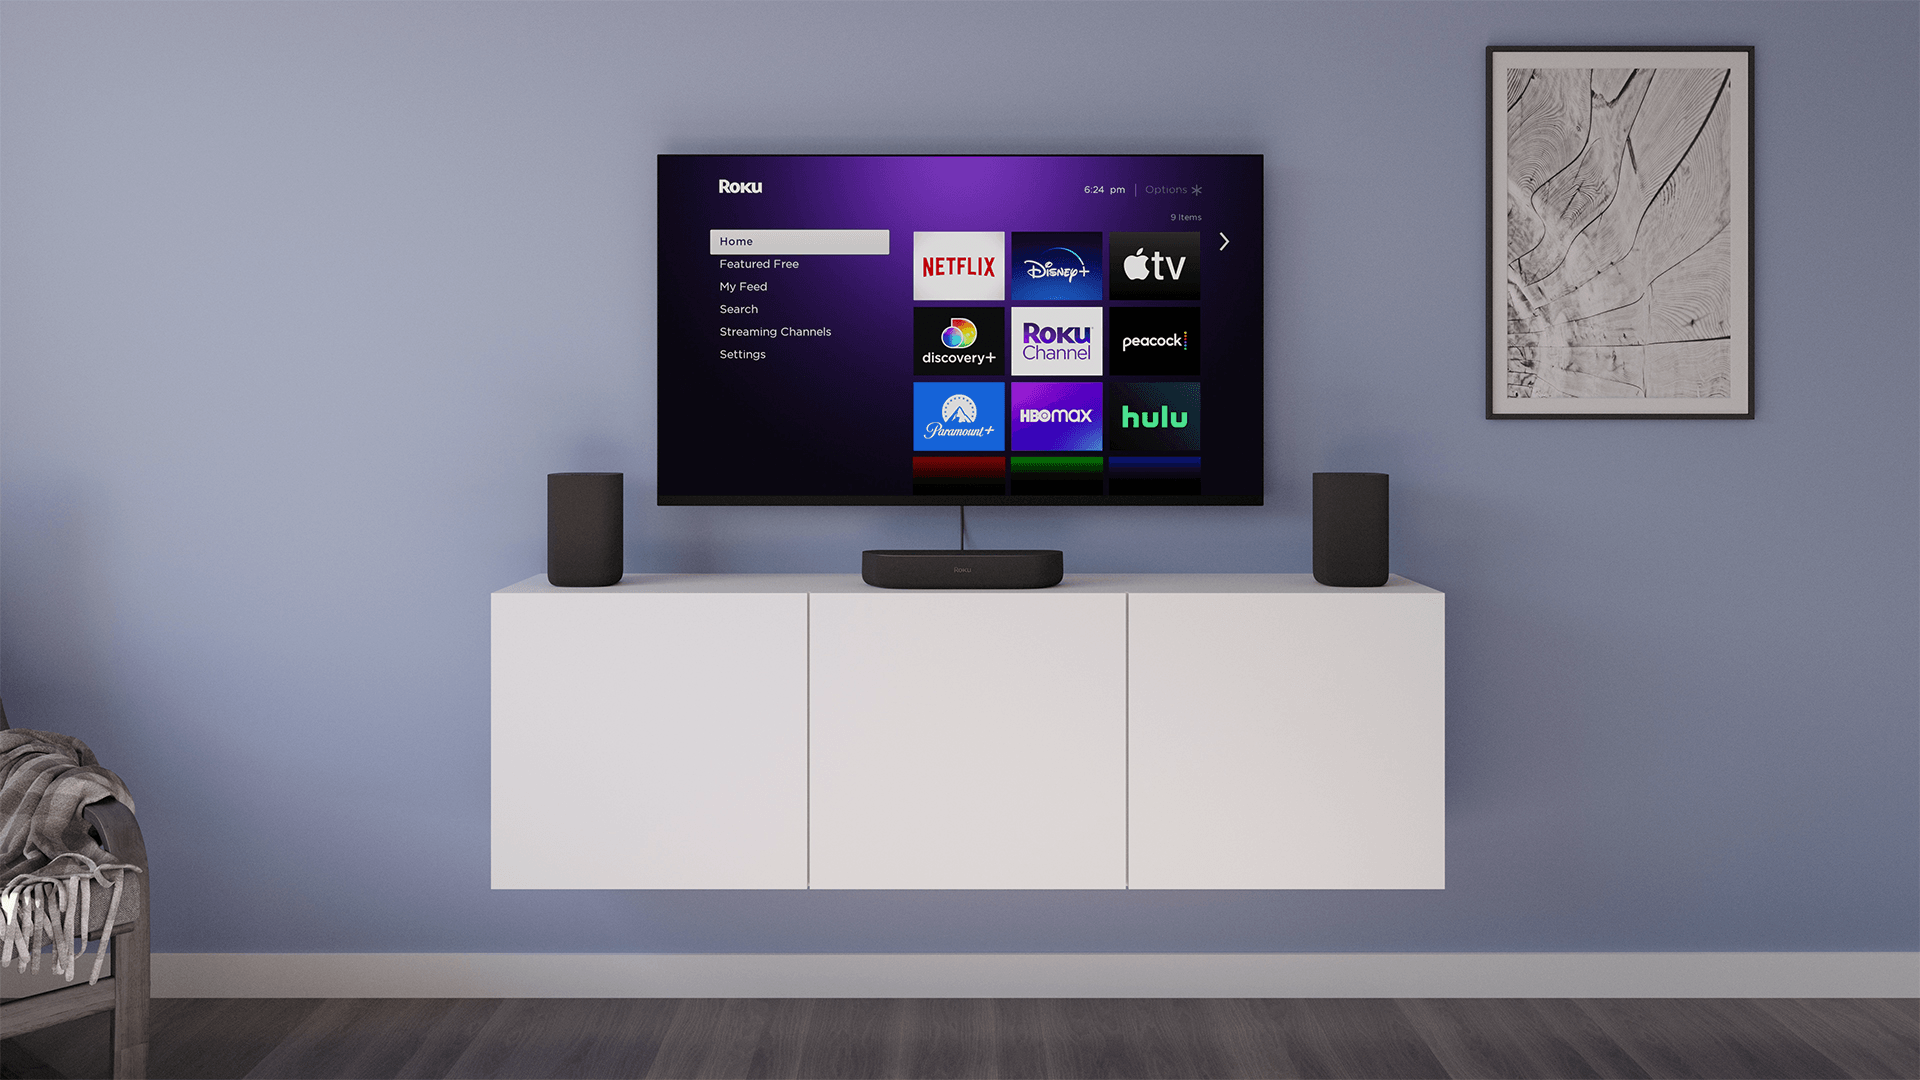 Roku Streaming Devices Are on Sale Starting at $25